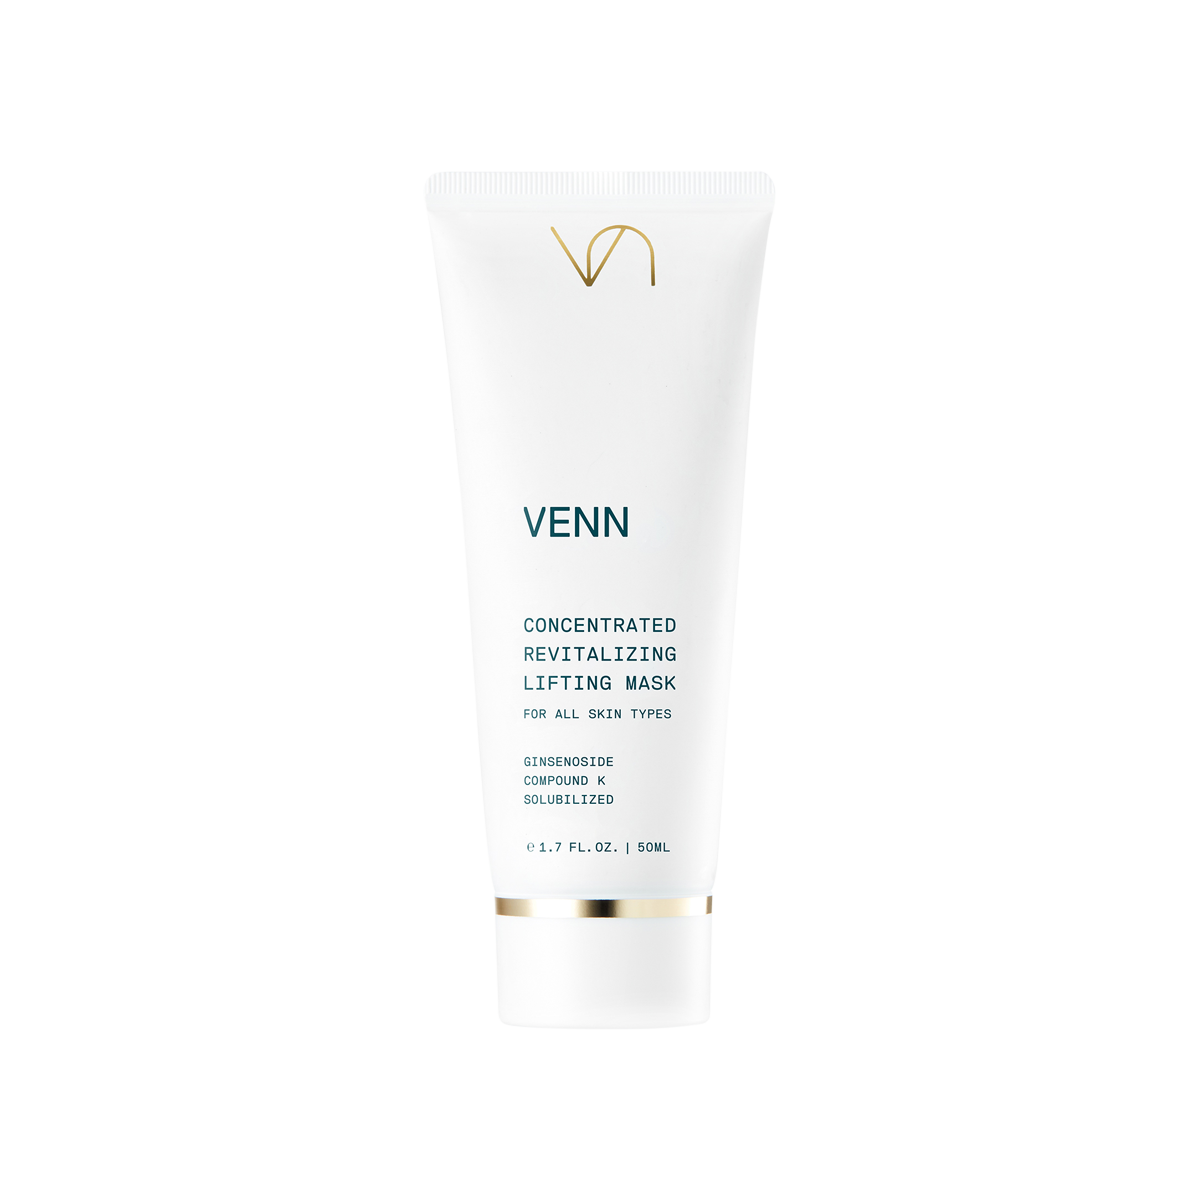 VENN - Concentrated Revitalizing Lifting Mask